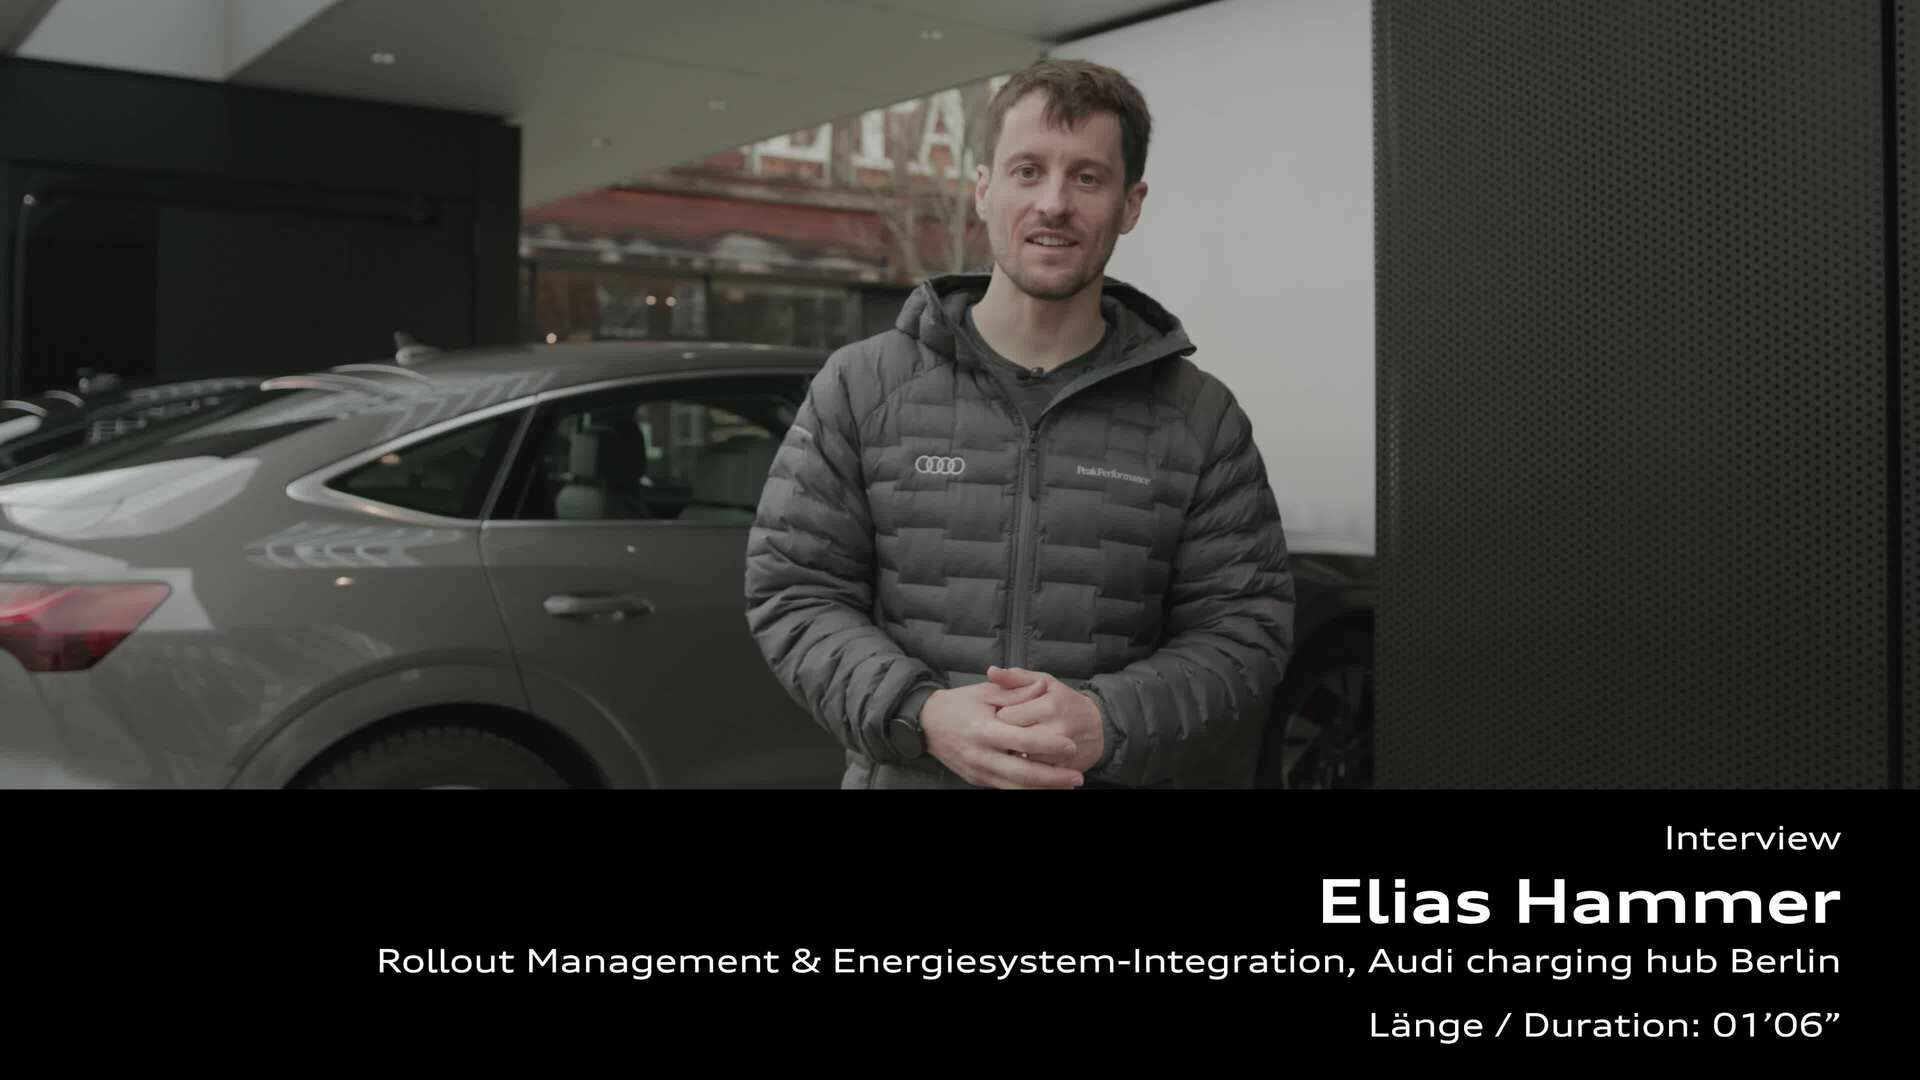 Footage: Statement from Elias Hammer on the Audi charging hub Berlin